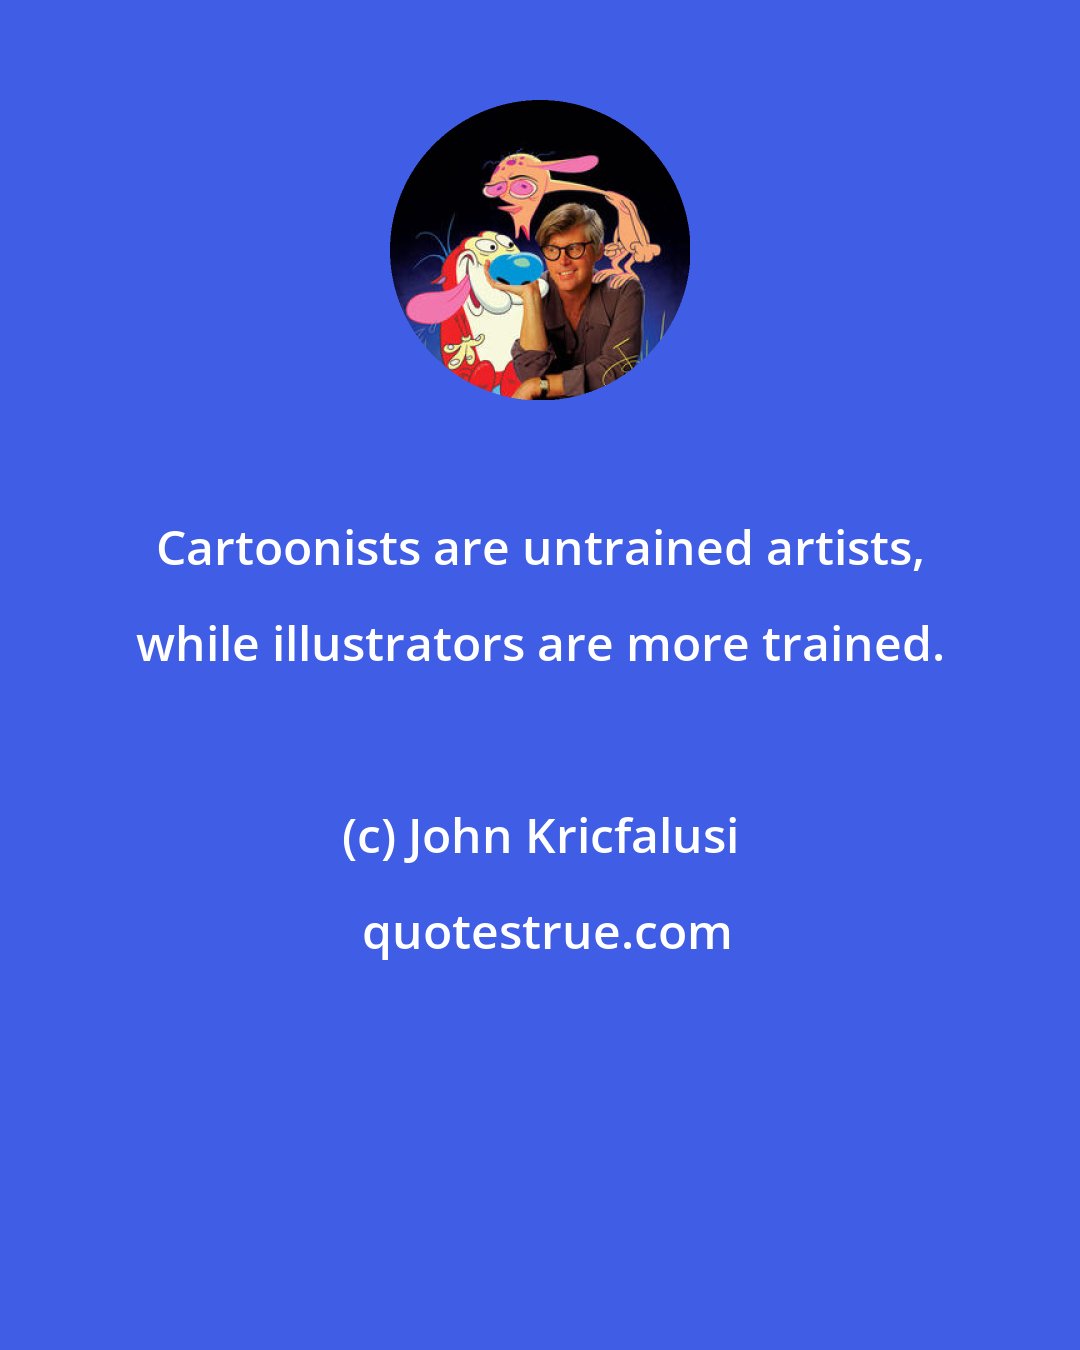 John Kricfalusi: Cartoonists are untrained artists, while illustrators are more trained.